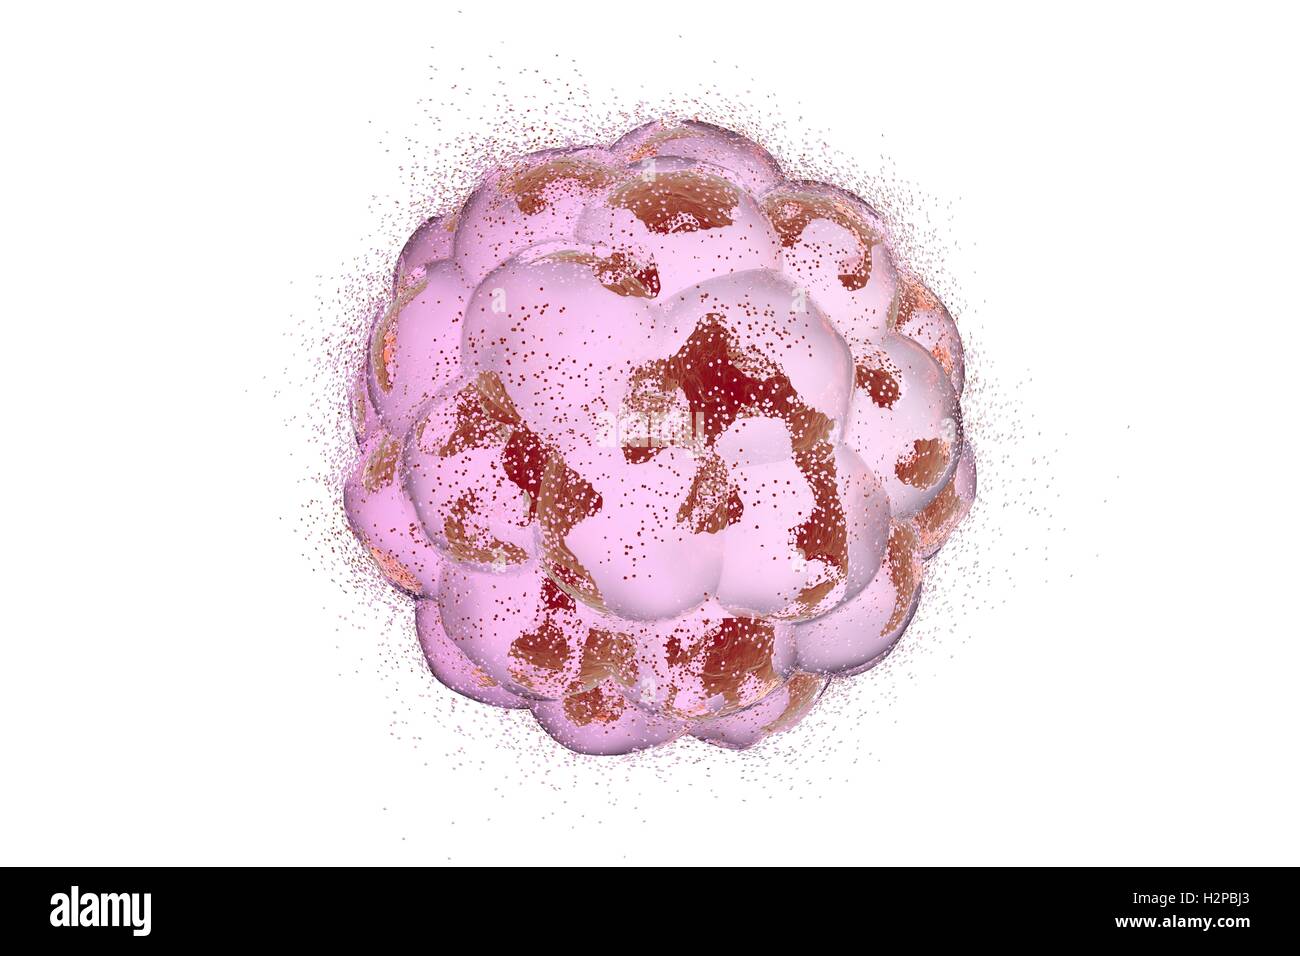 Destruction of a human embryo. Illustration that can be used to illustrate the teratogenic effect of drugs, viruses, microbes, and abortive medicines. Stock Photo